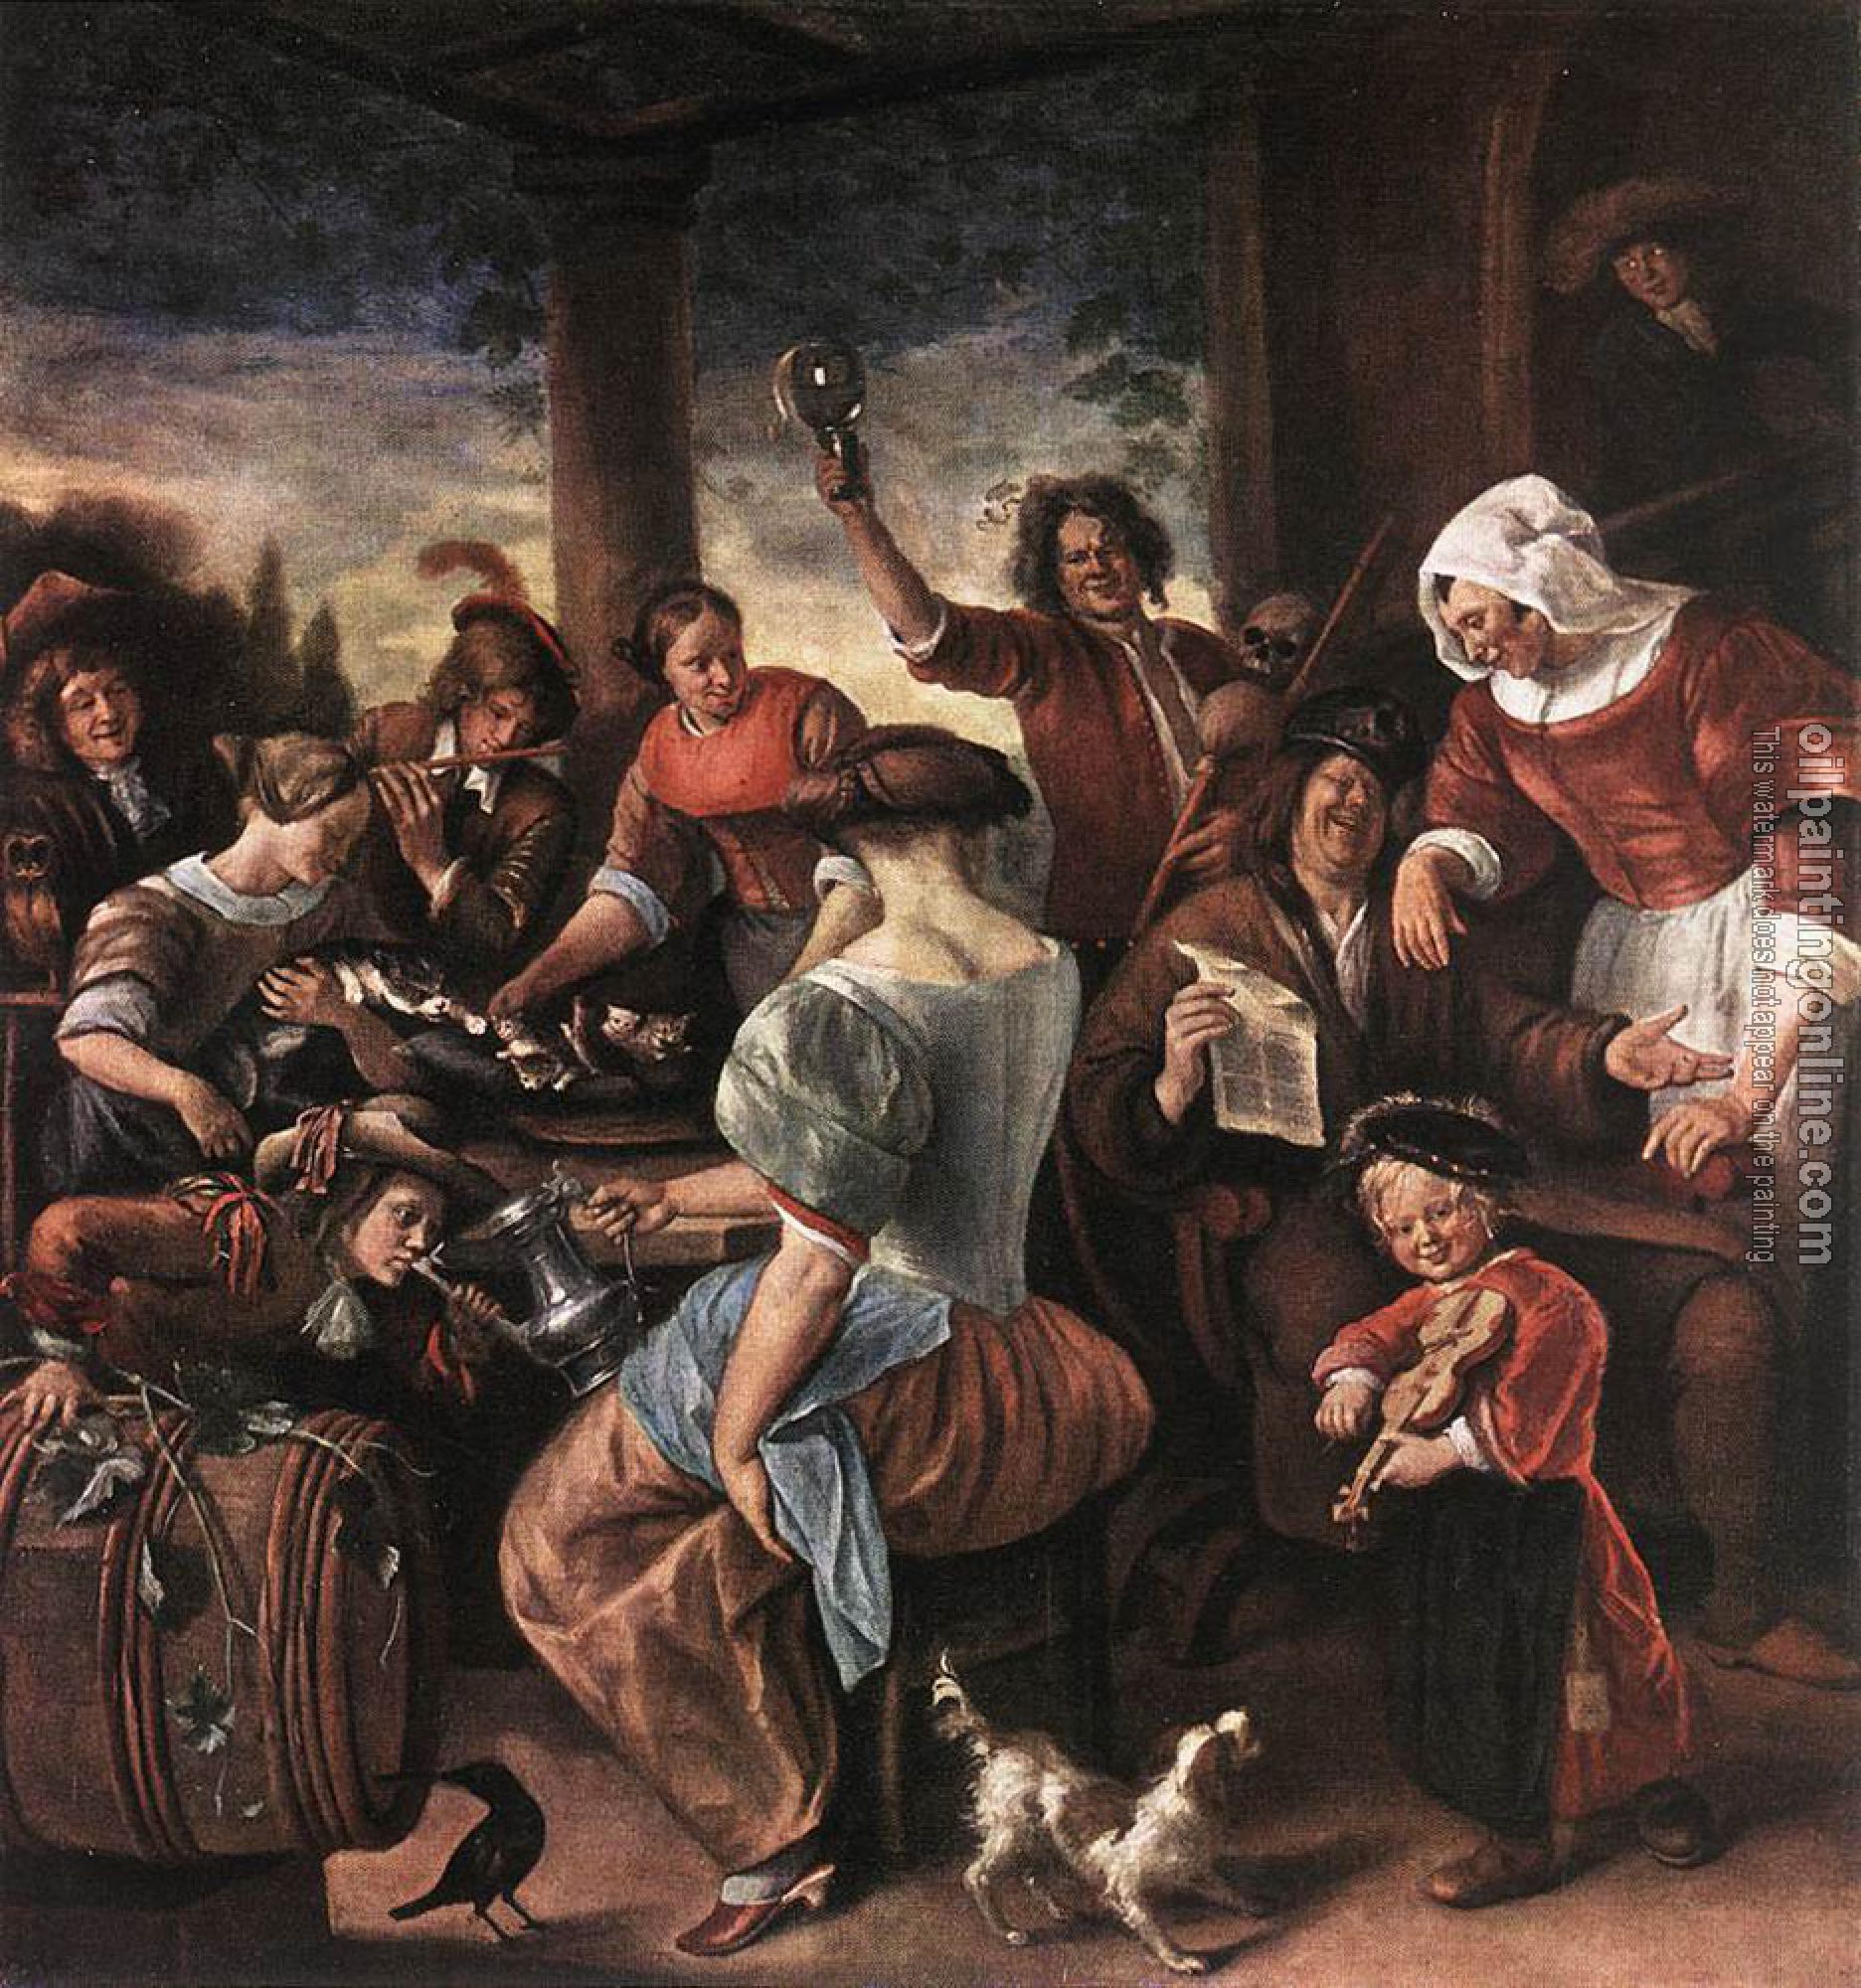 Steen, Jan - A Merry Party